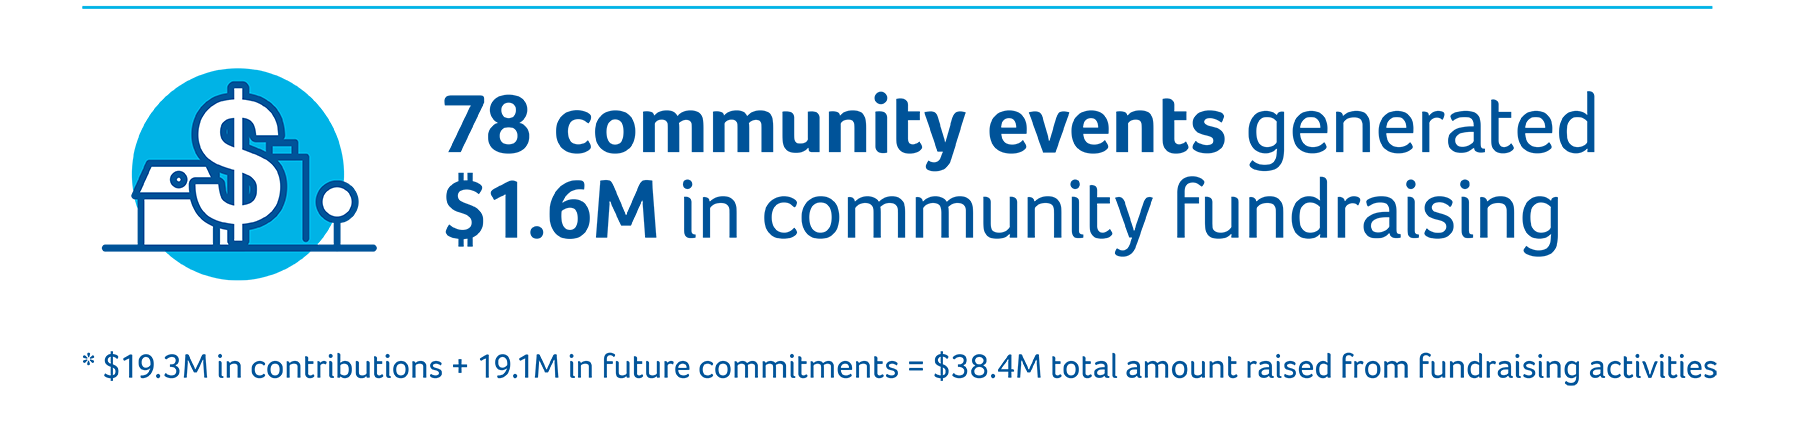 78 community events generated $1.6M in community fundraising ($19.3M in contributions + $19.1M in future commitments = $38.4M total amount raised from fundraising activities.